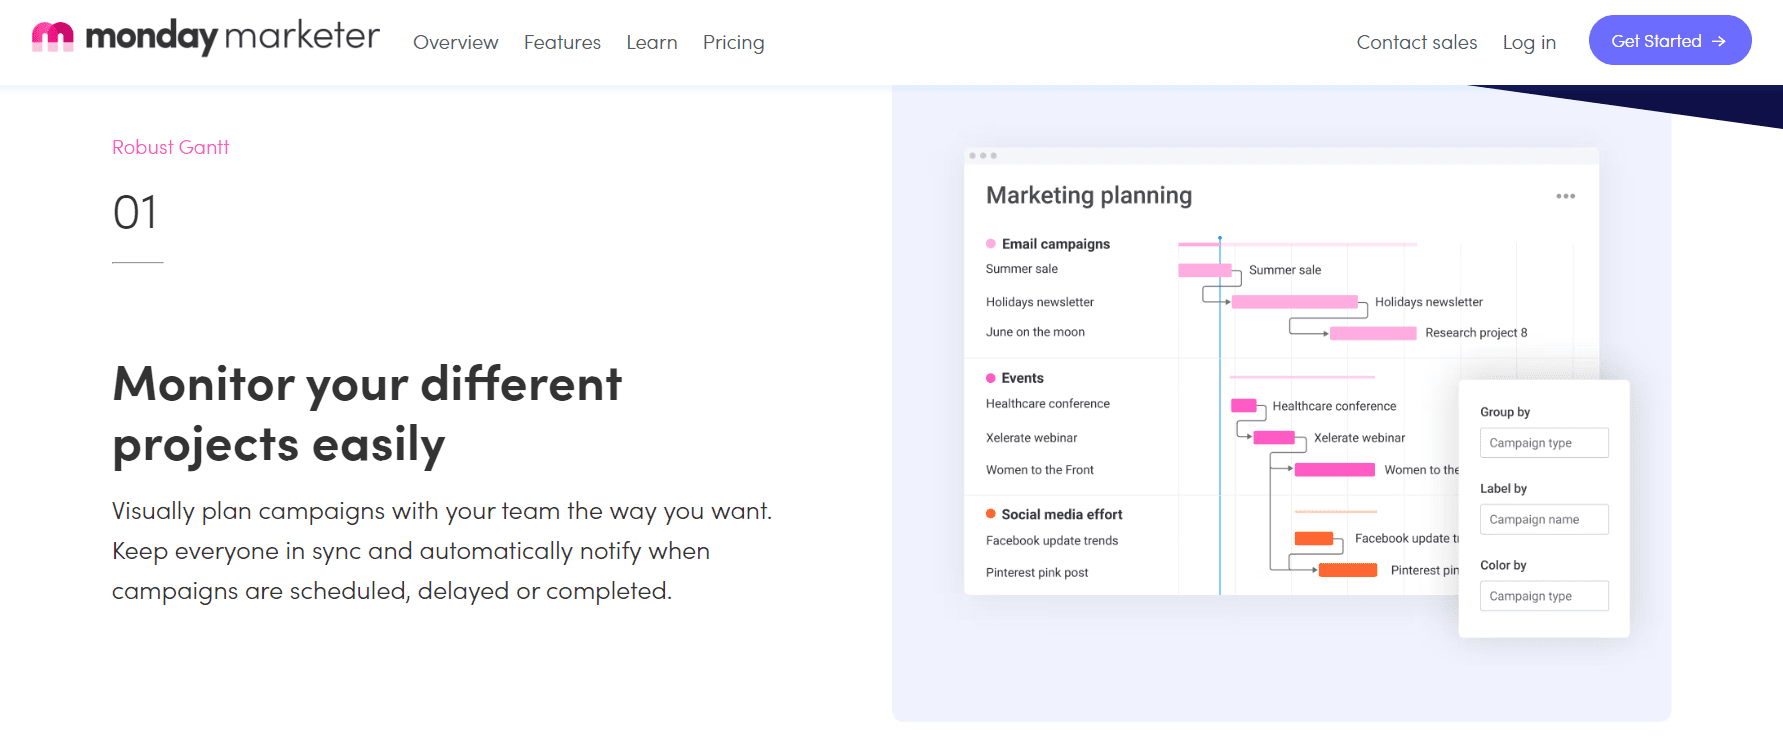 Content planning tool - Monday